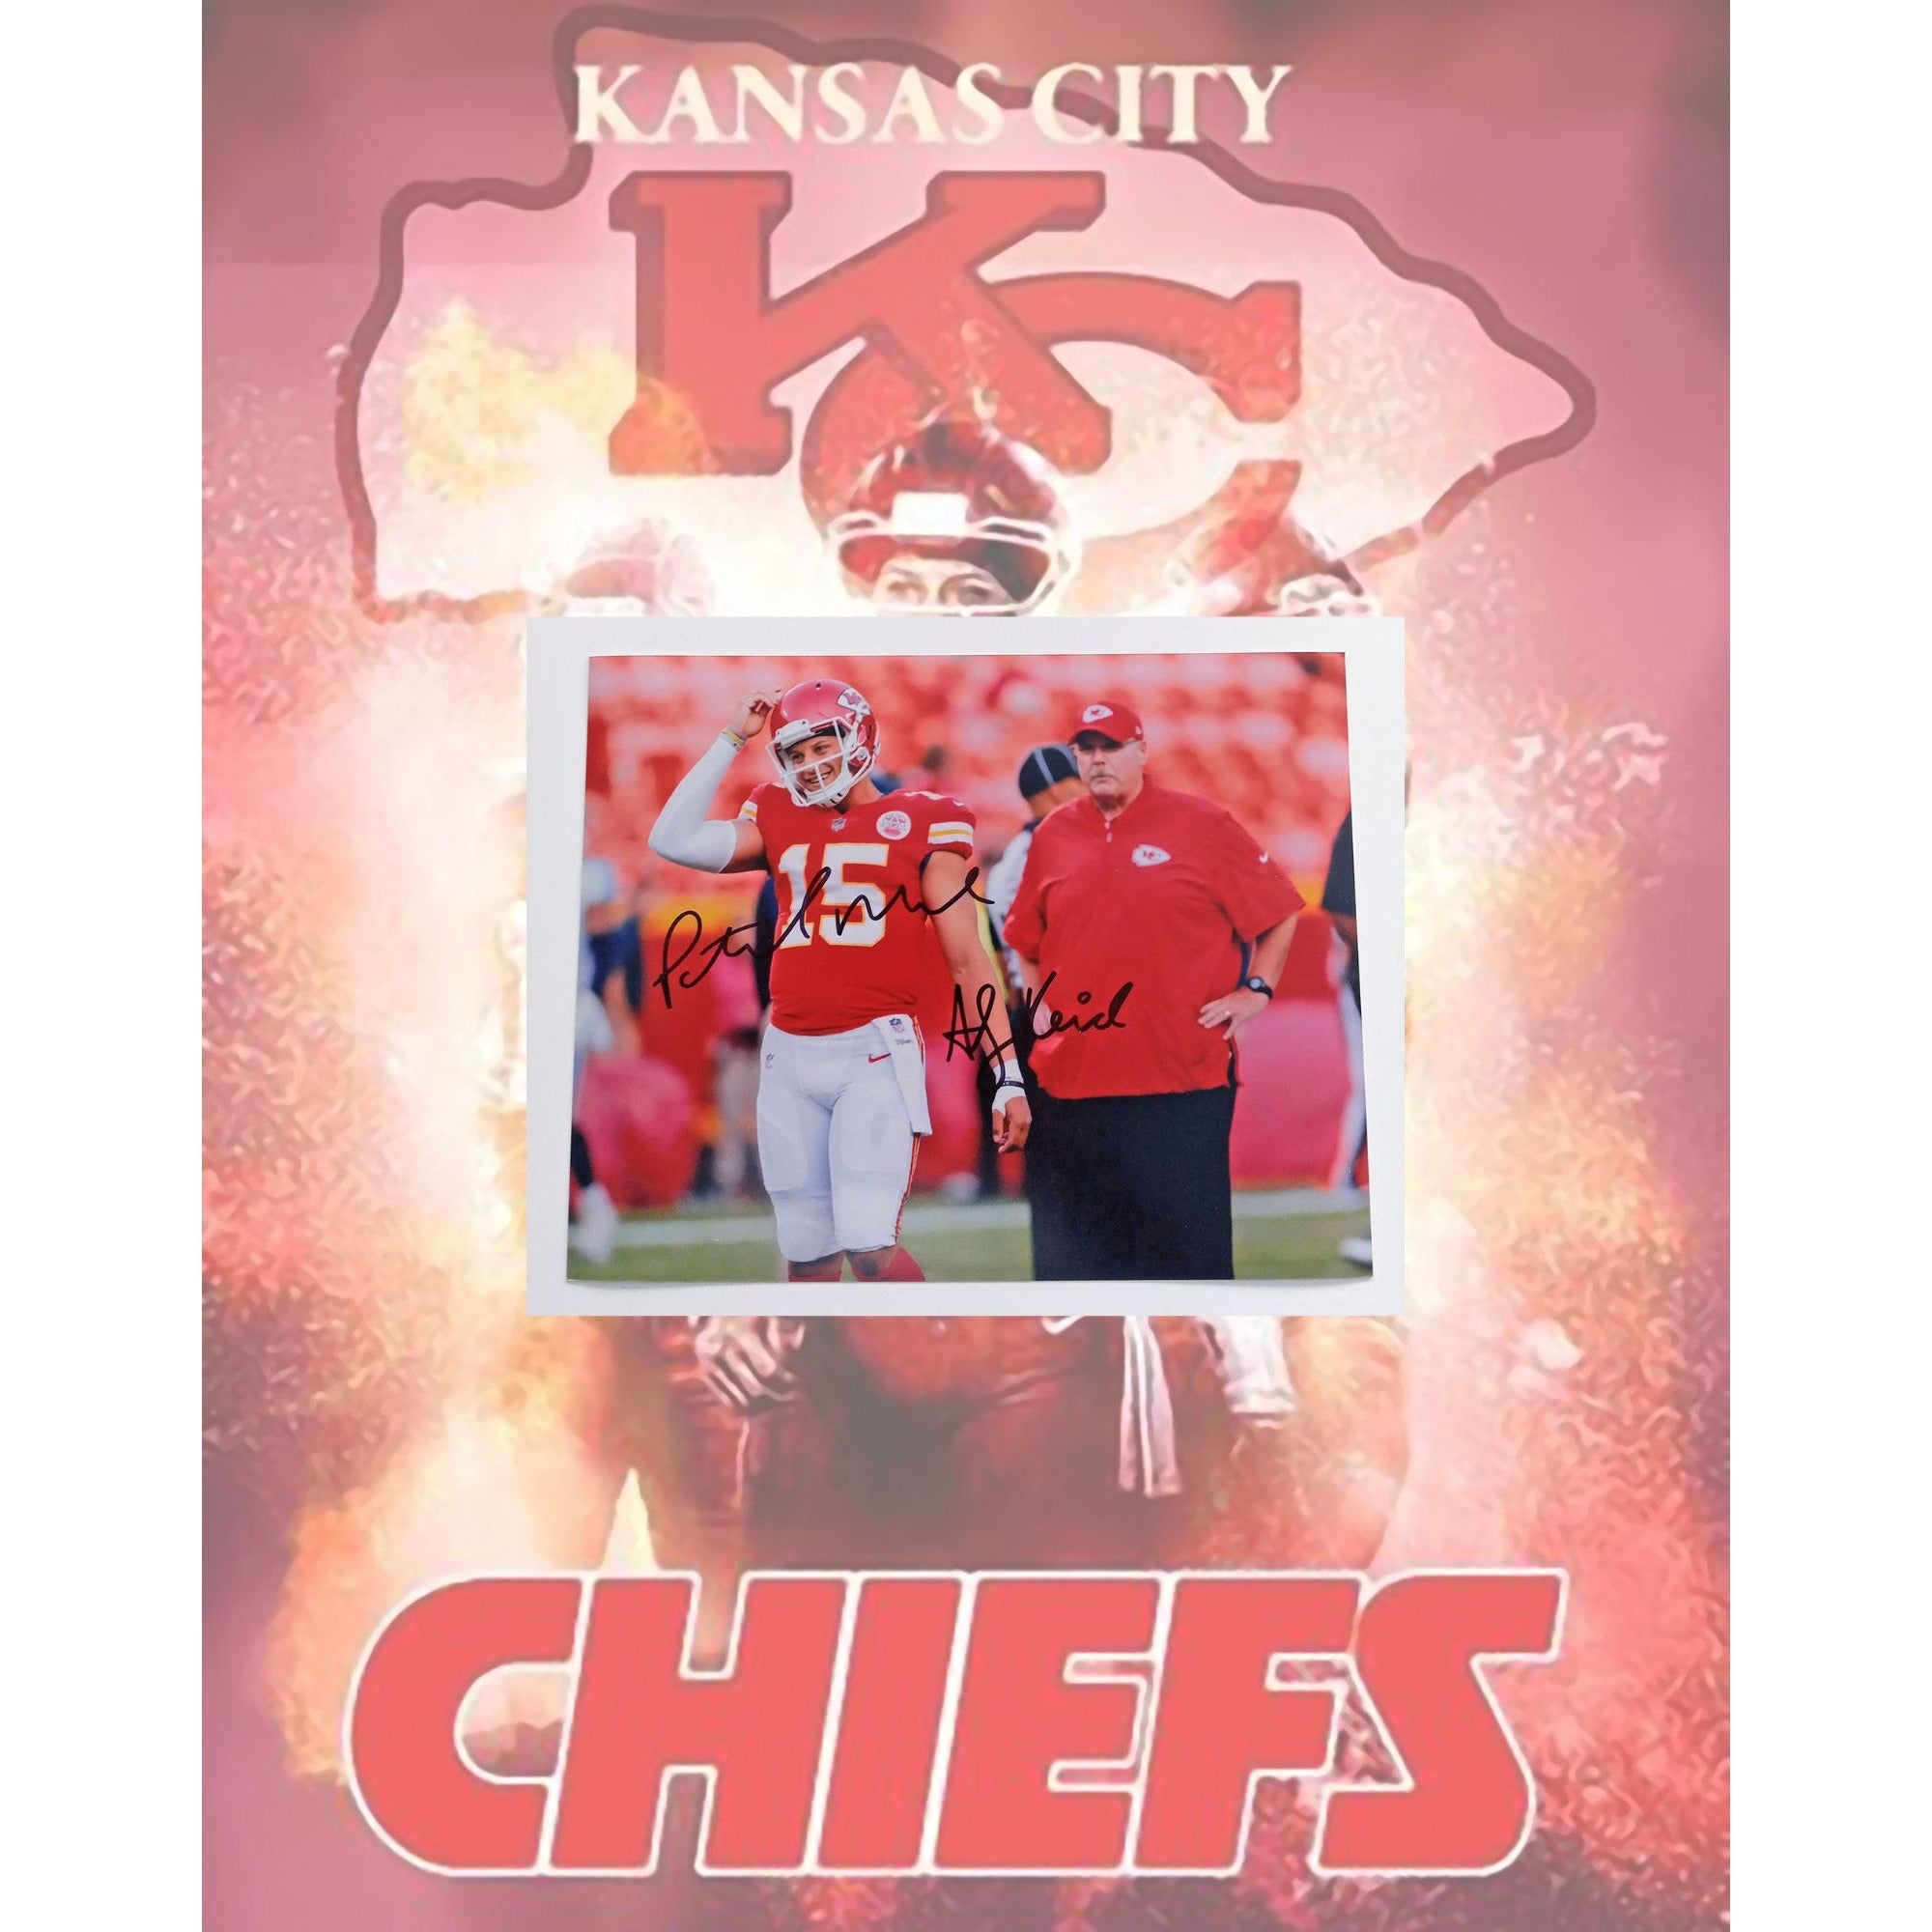 Kansas City Chiefs Patrick Mahomes and Andy Reid 8 x 10 signed photo with proof